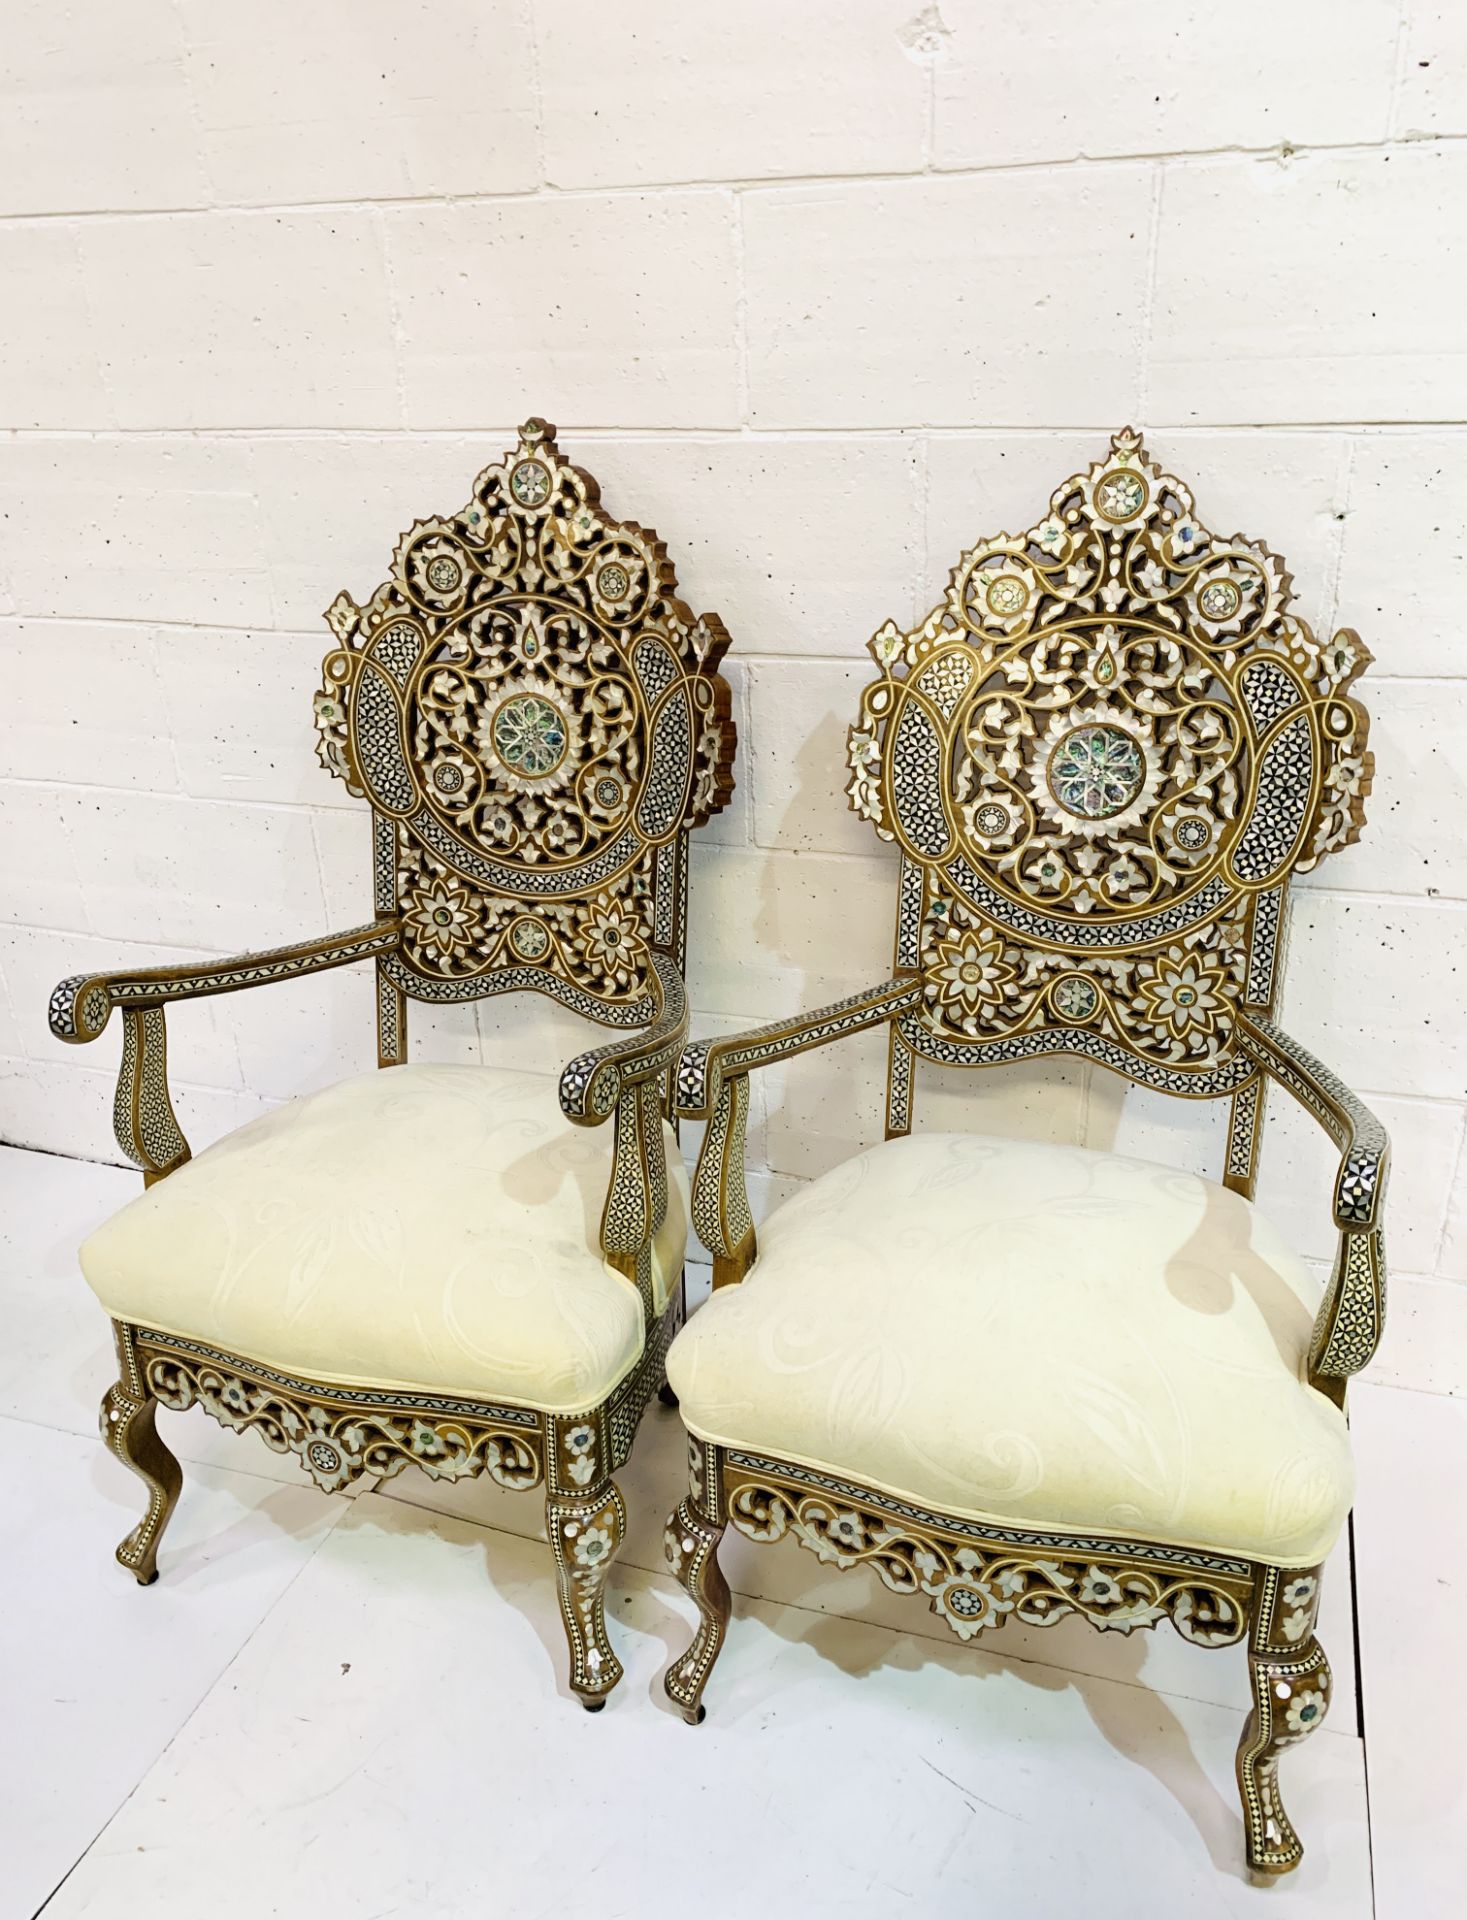 Pair of open armchairs profusely decorated with mother of pearl - Image 2 of 5